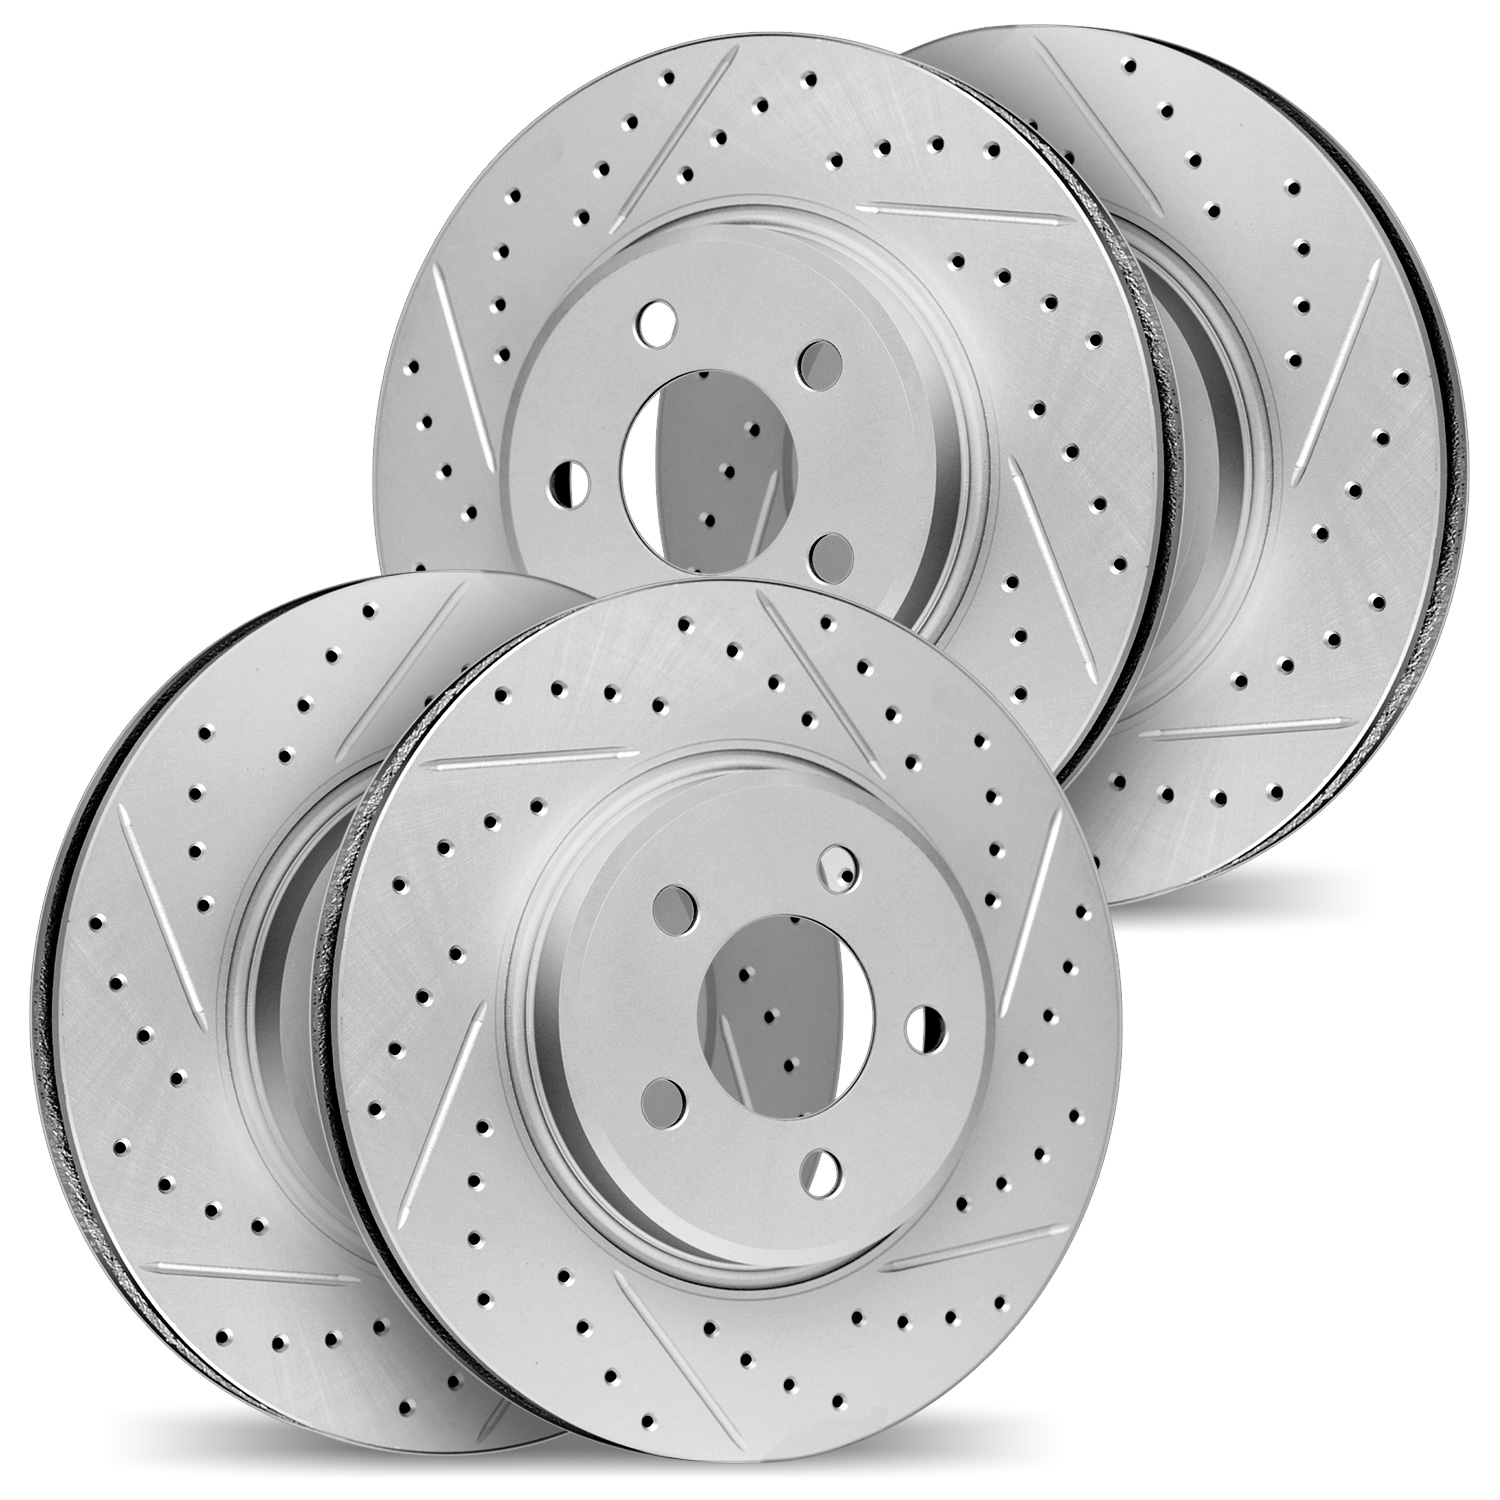 2004-10000 Geoperformance Drilled/Slotted Brake Rotors, 2017-2020 Kia/Hyundai/Genesis, Position: Front and Rear